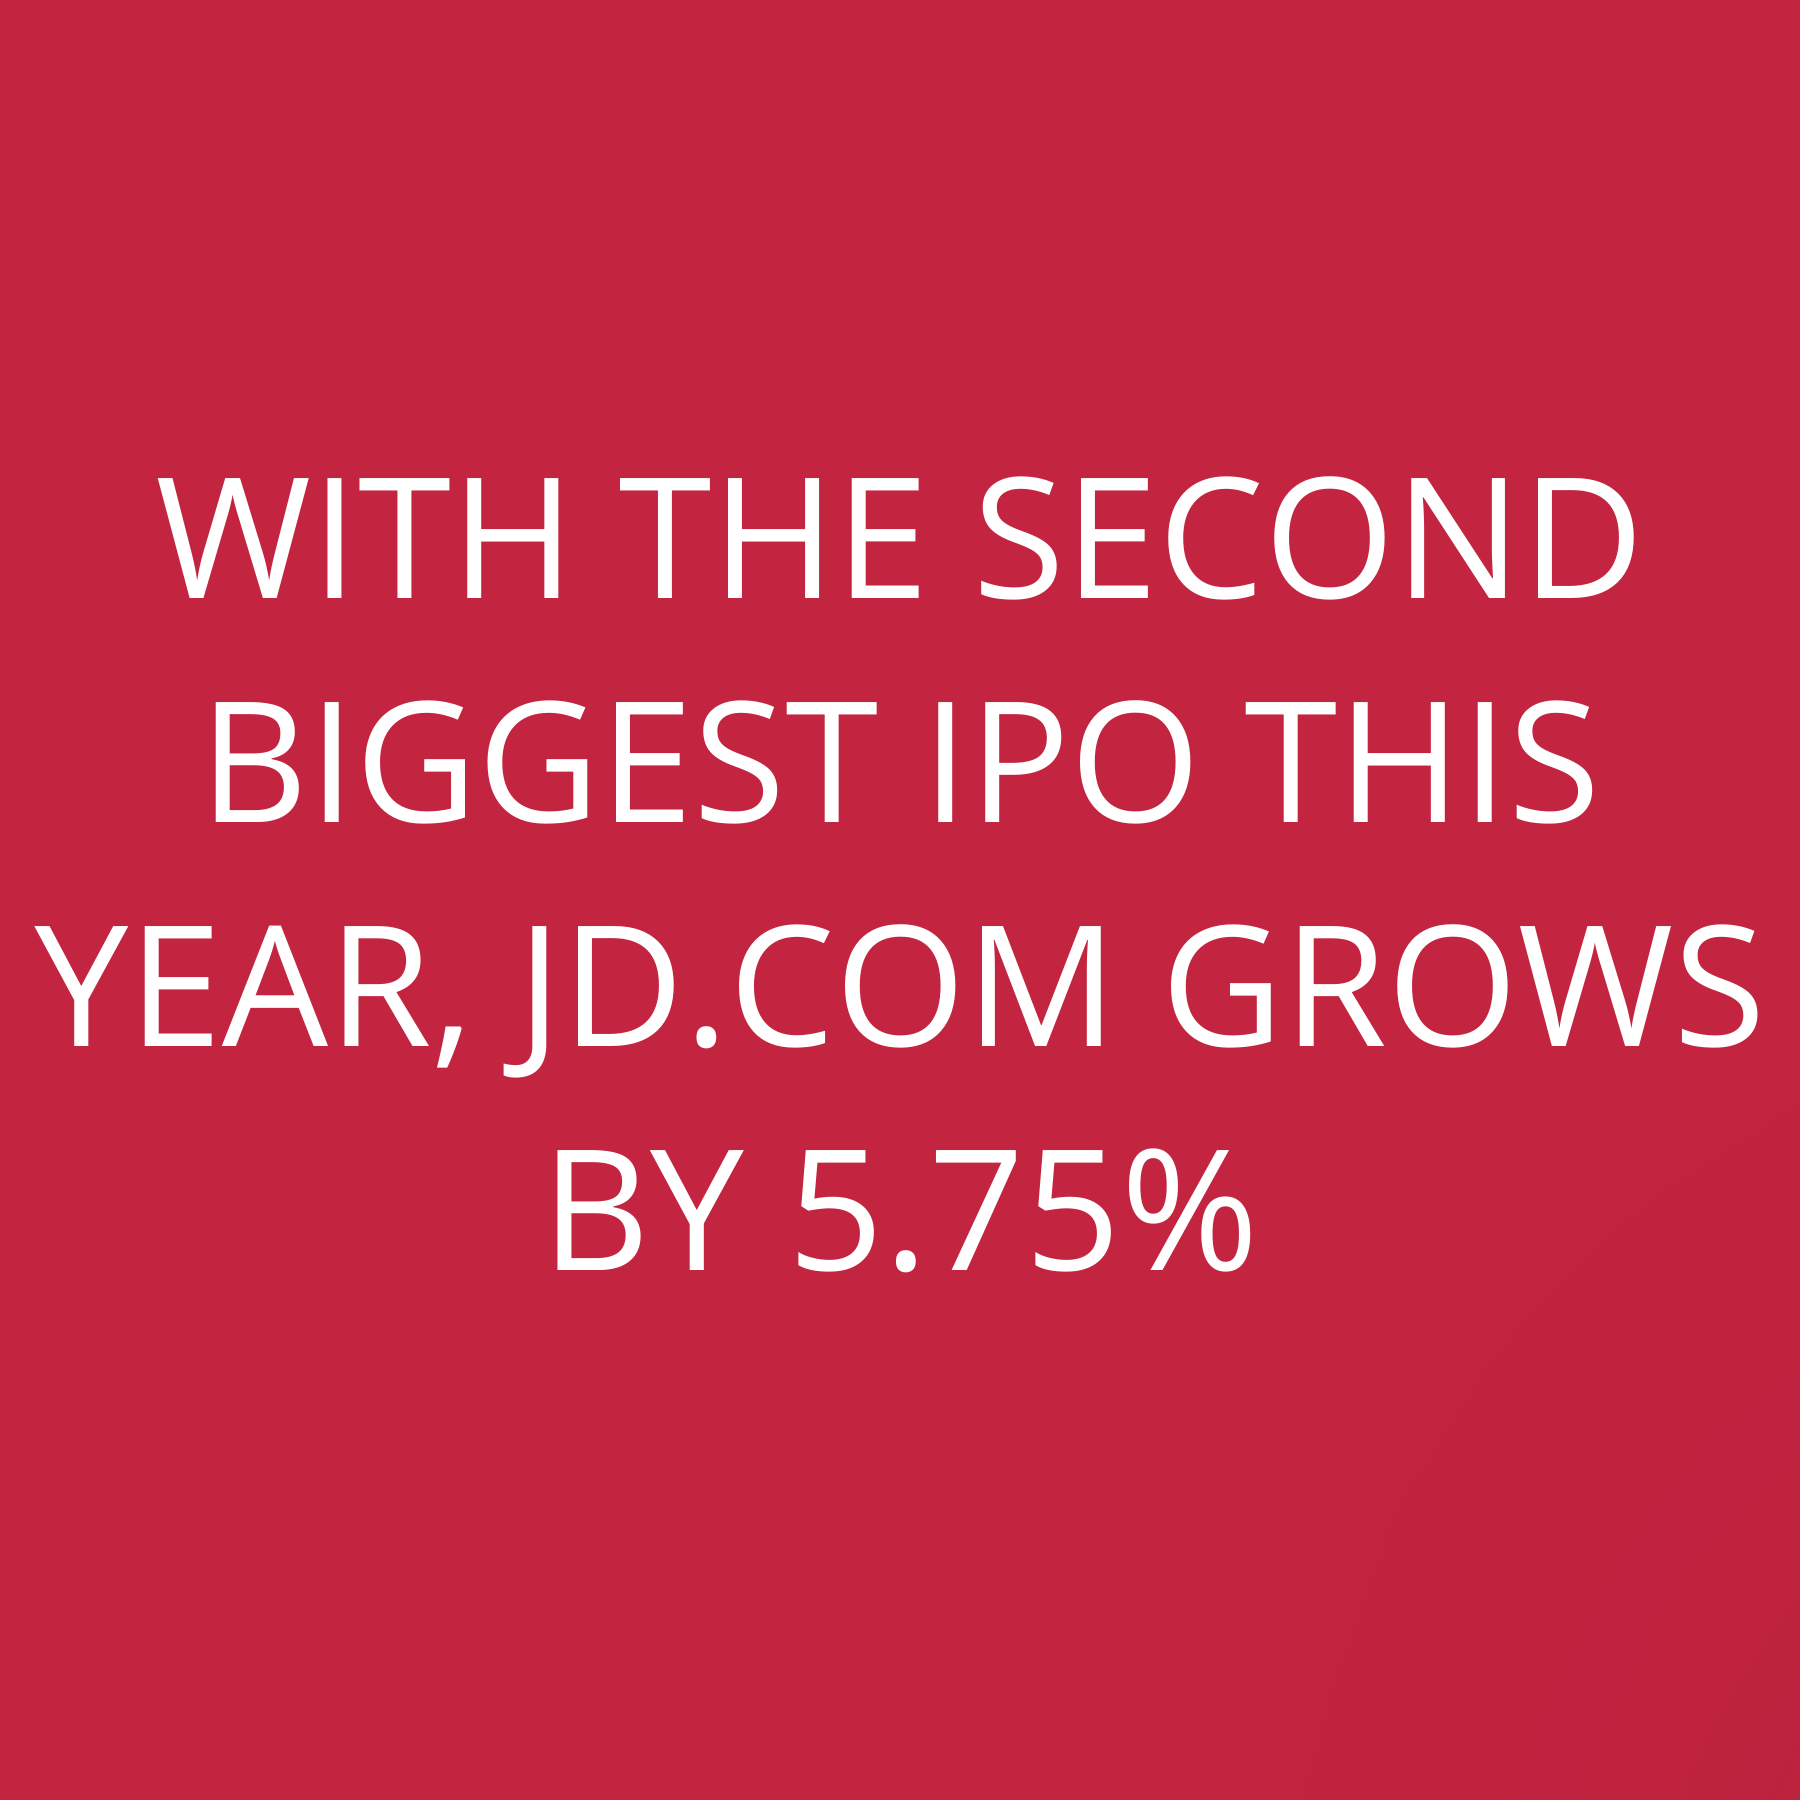 With the second biggest IPO this year, JD.com grows by 5.75%